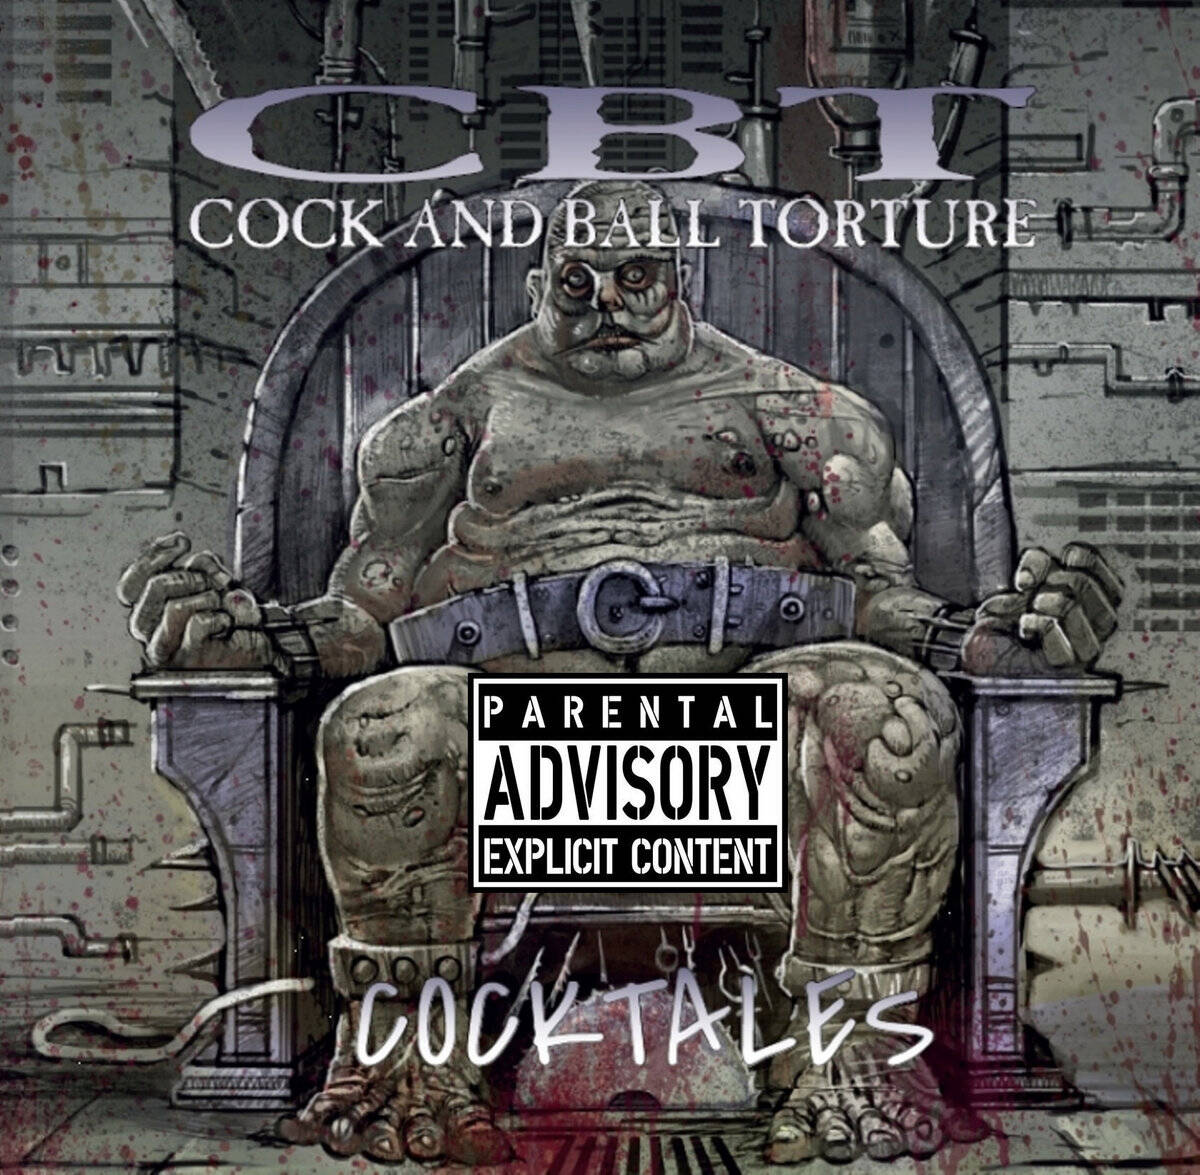 christopher camay recommends cock and ball touture pic